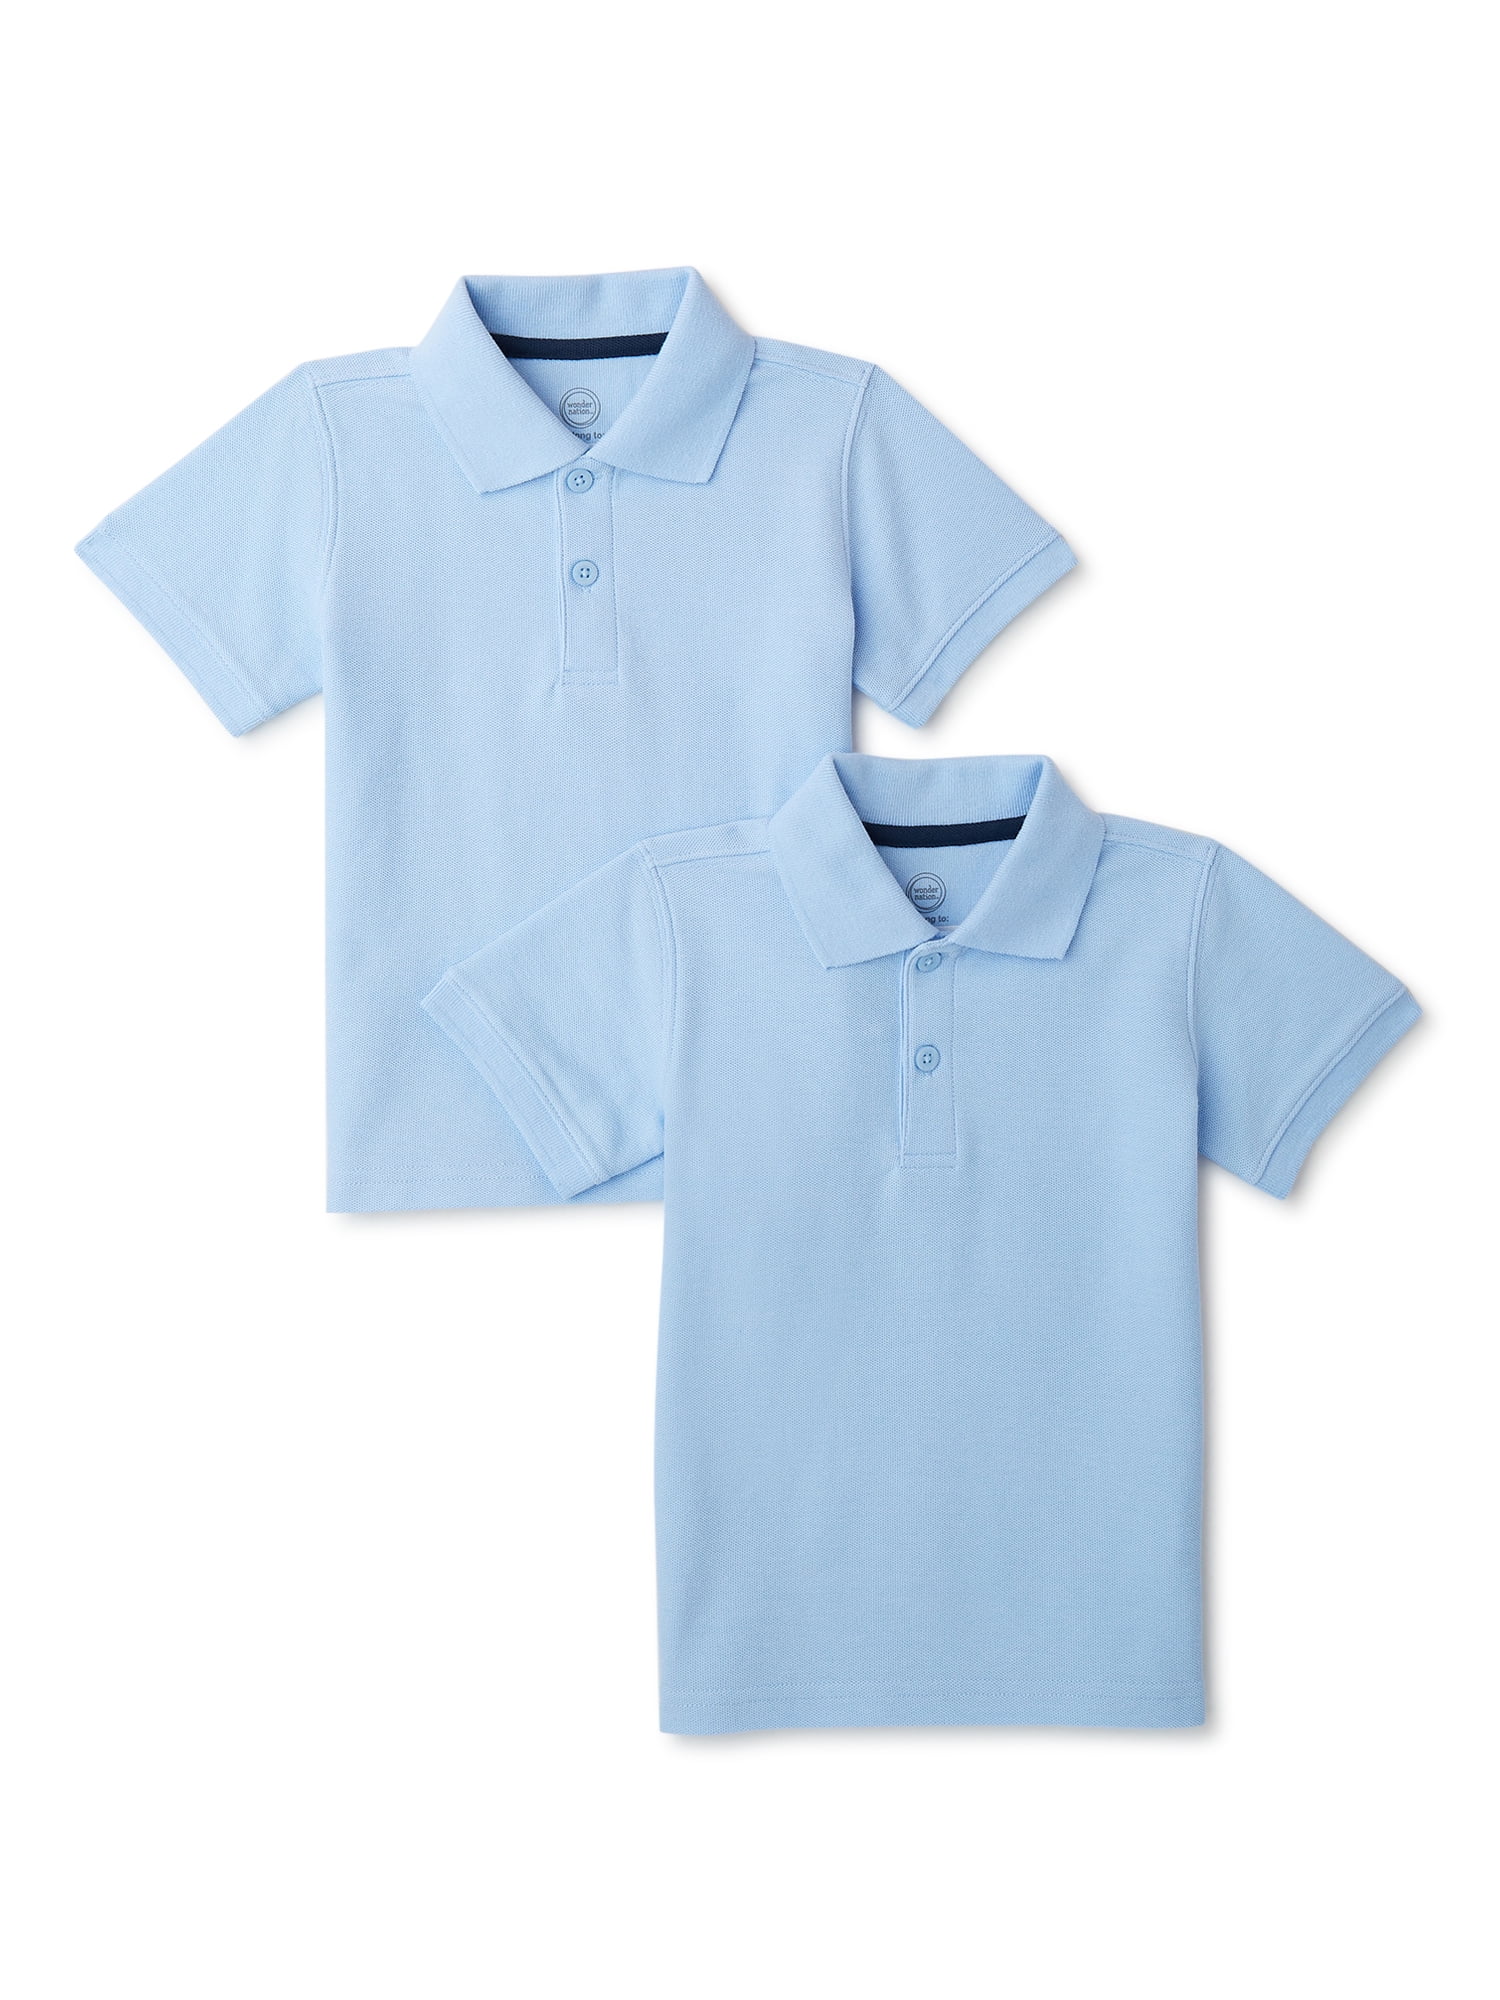 More Styles Available Eddie Bauer Boys 2 Pack Polo Shirt 